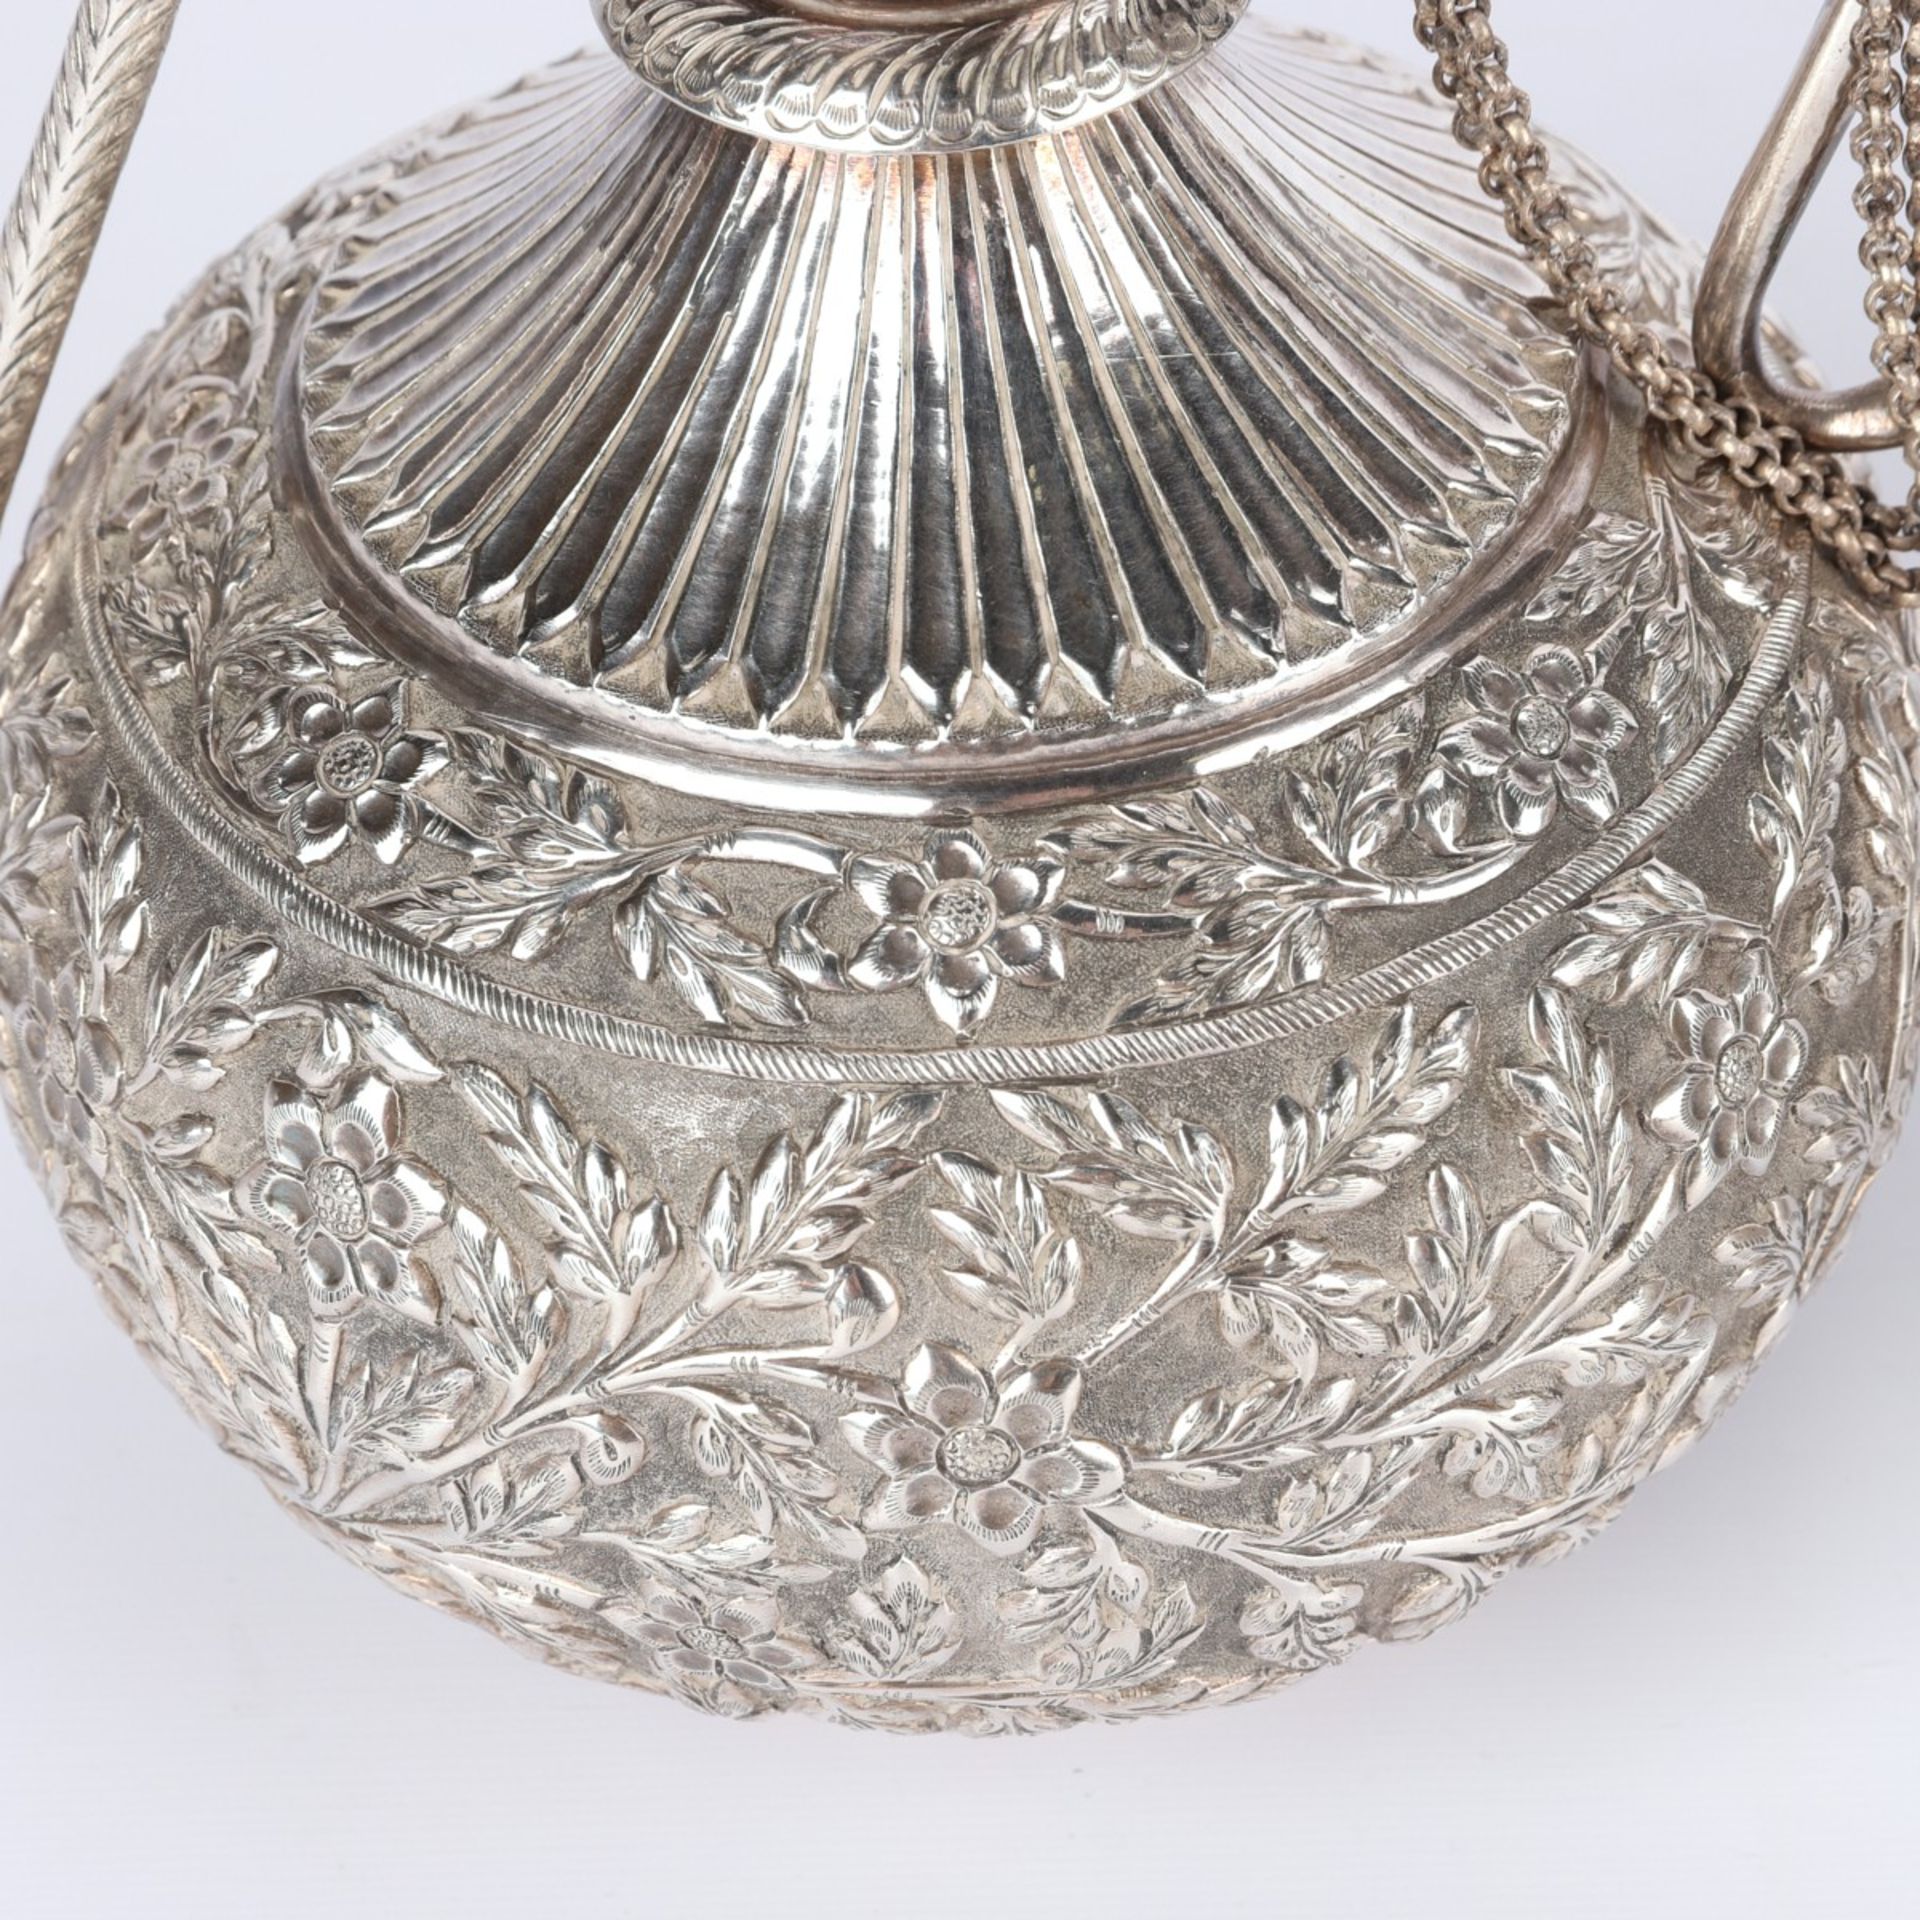 3 Sterling Silver Indian Water Vessels - Image 9 of 13